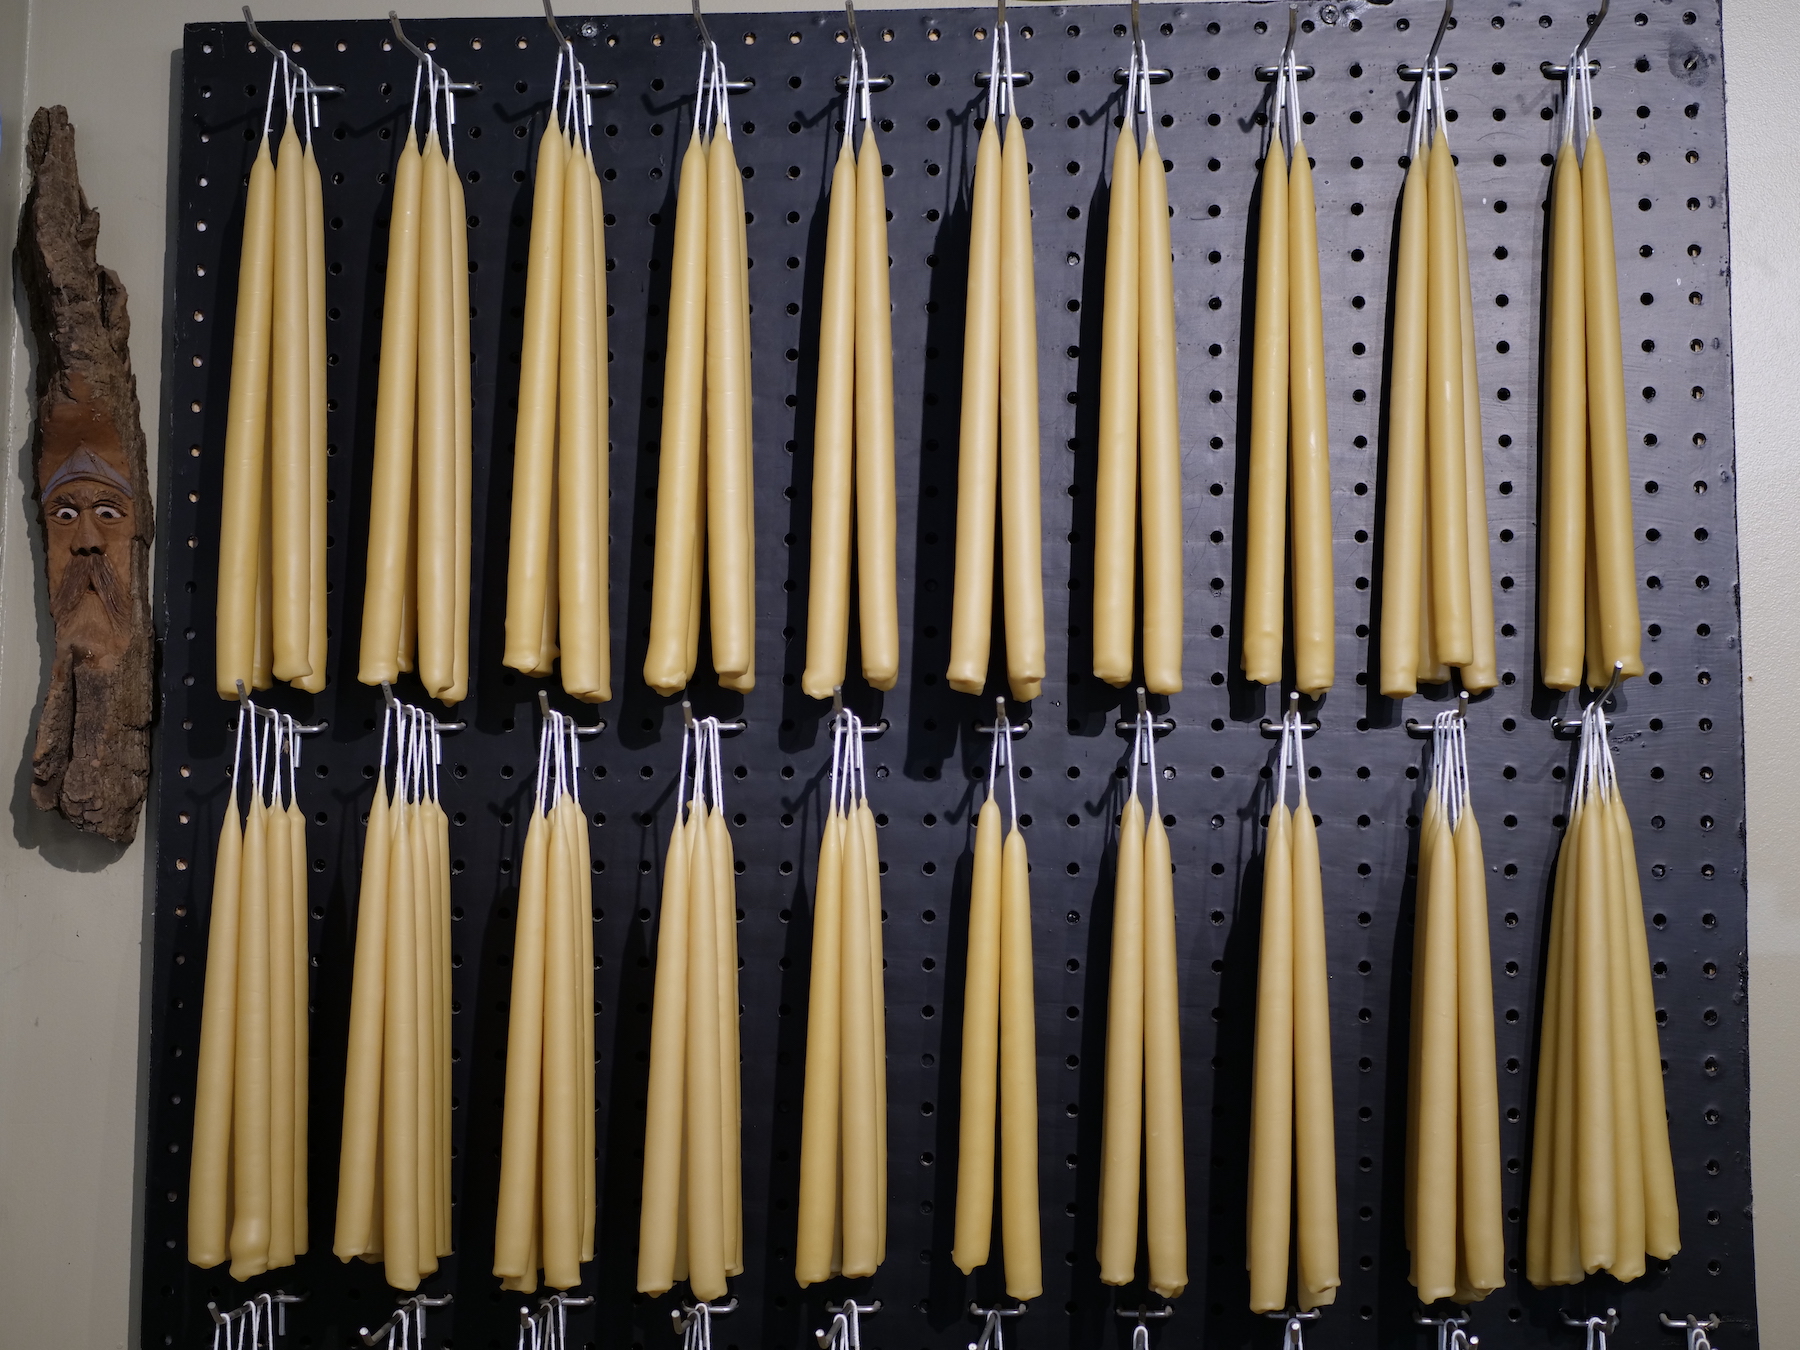 A wall of beeswax candles